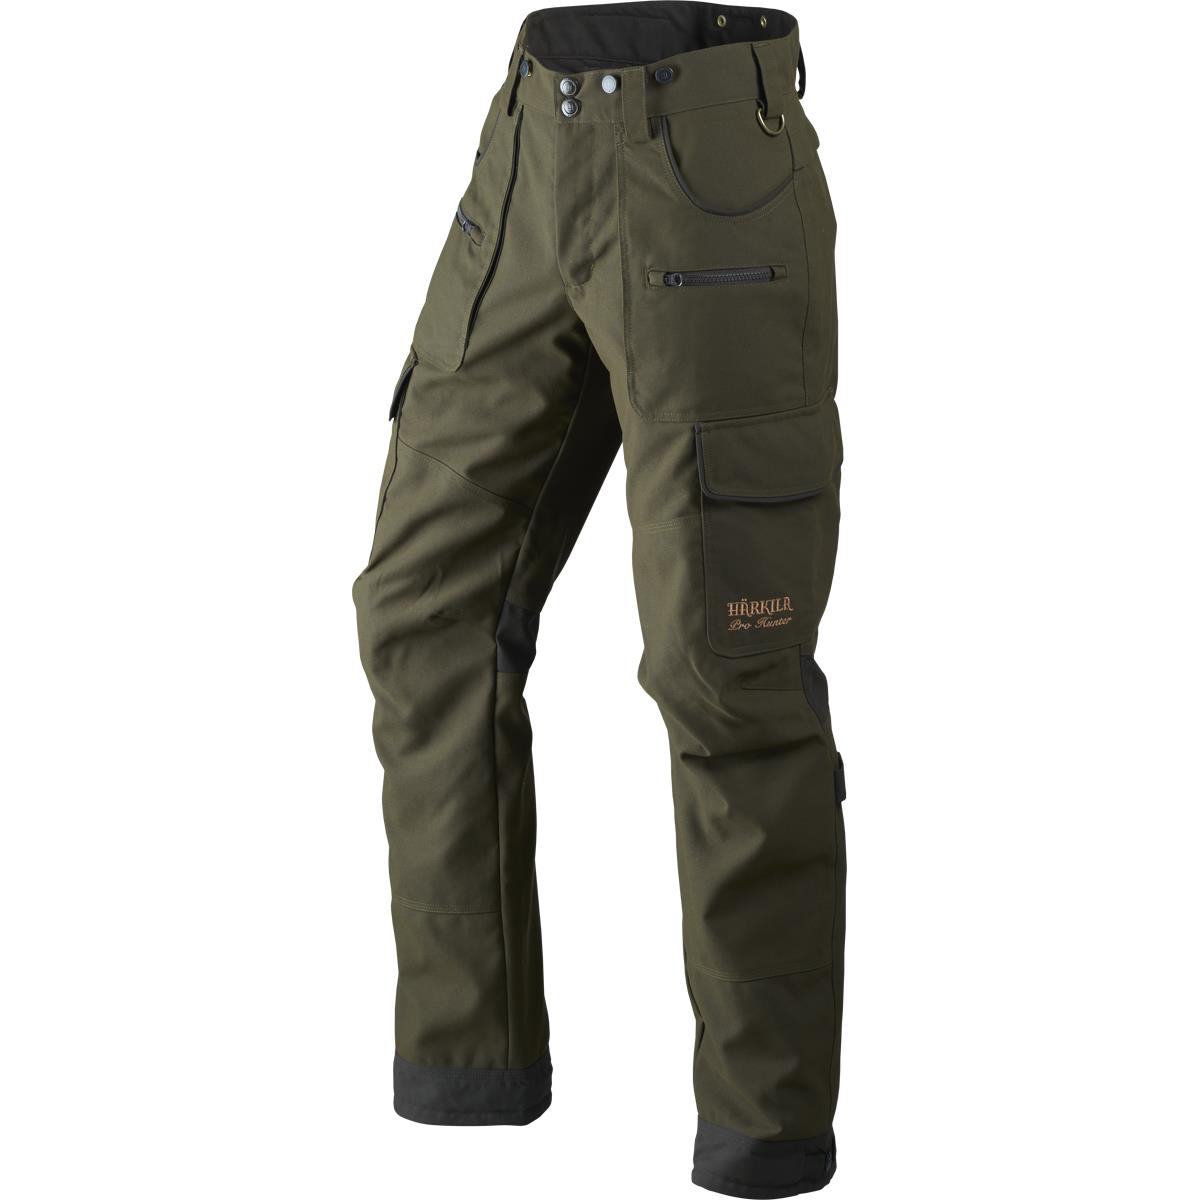 What is the ref. number for PM in Harkila Pro Hunter trousers?